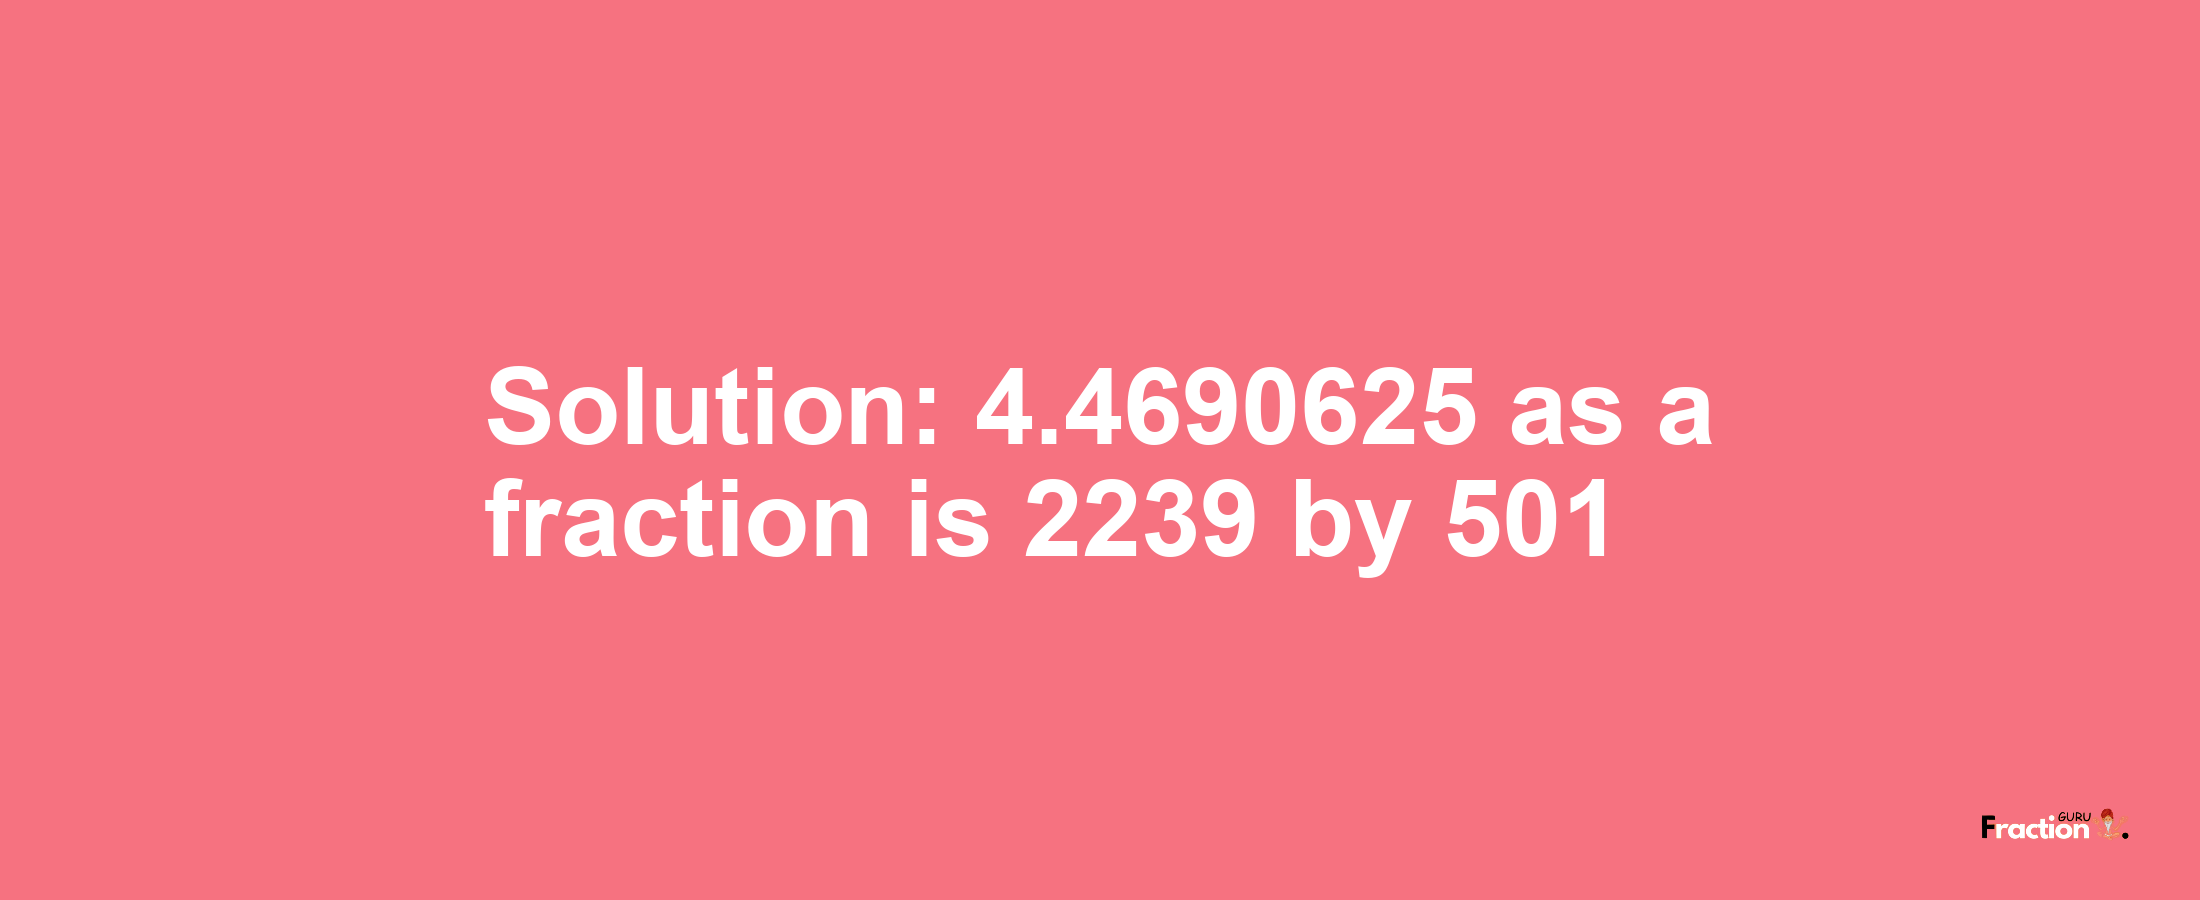 Solution:4.4690625 as a fraction is 2239/501